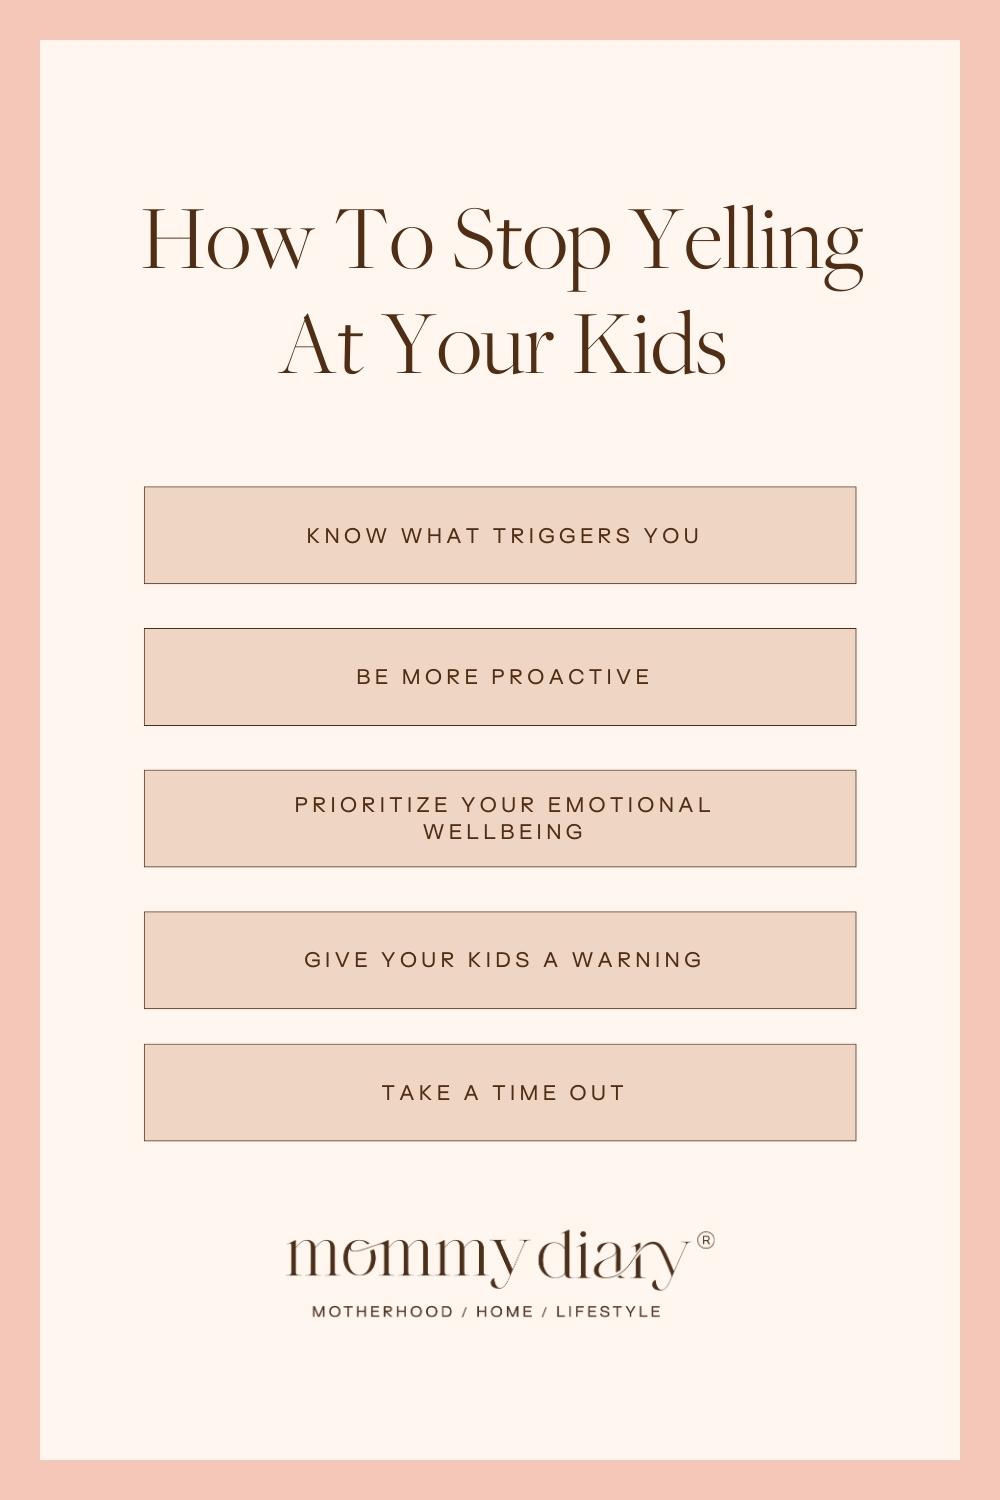 How To Stop Yelling At Your Kids List